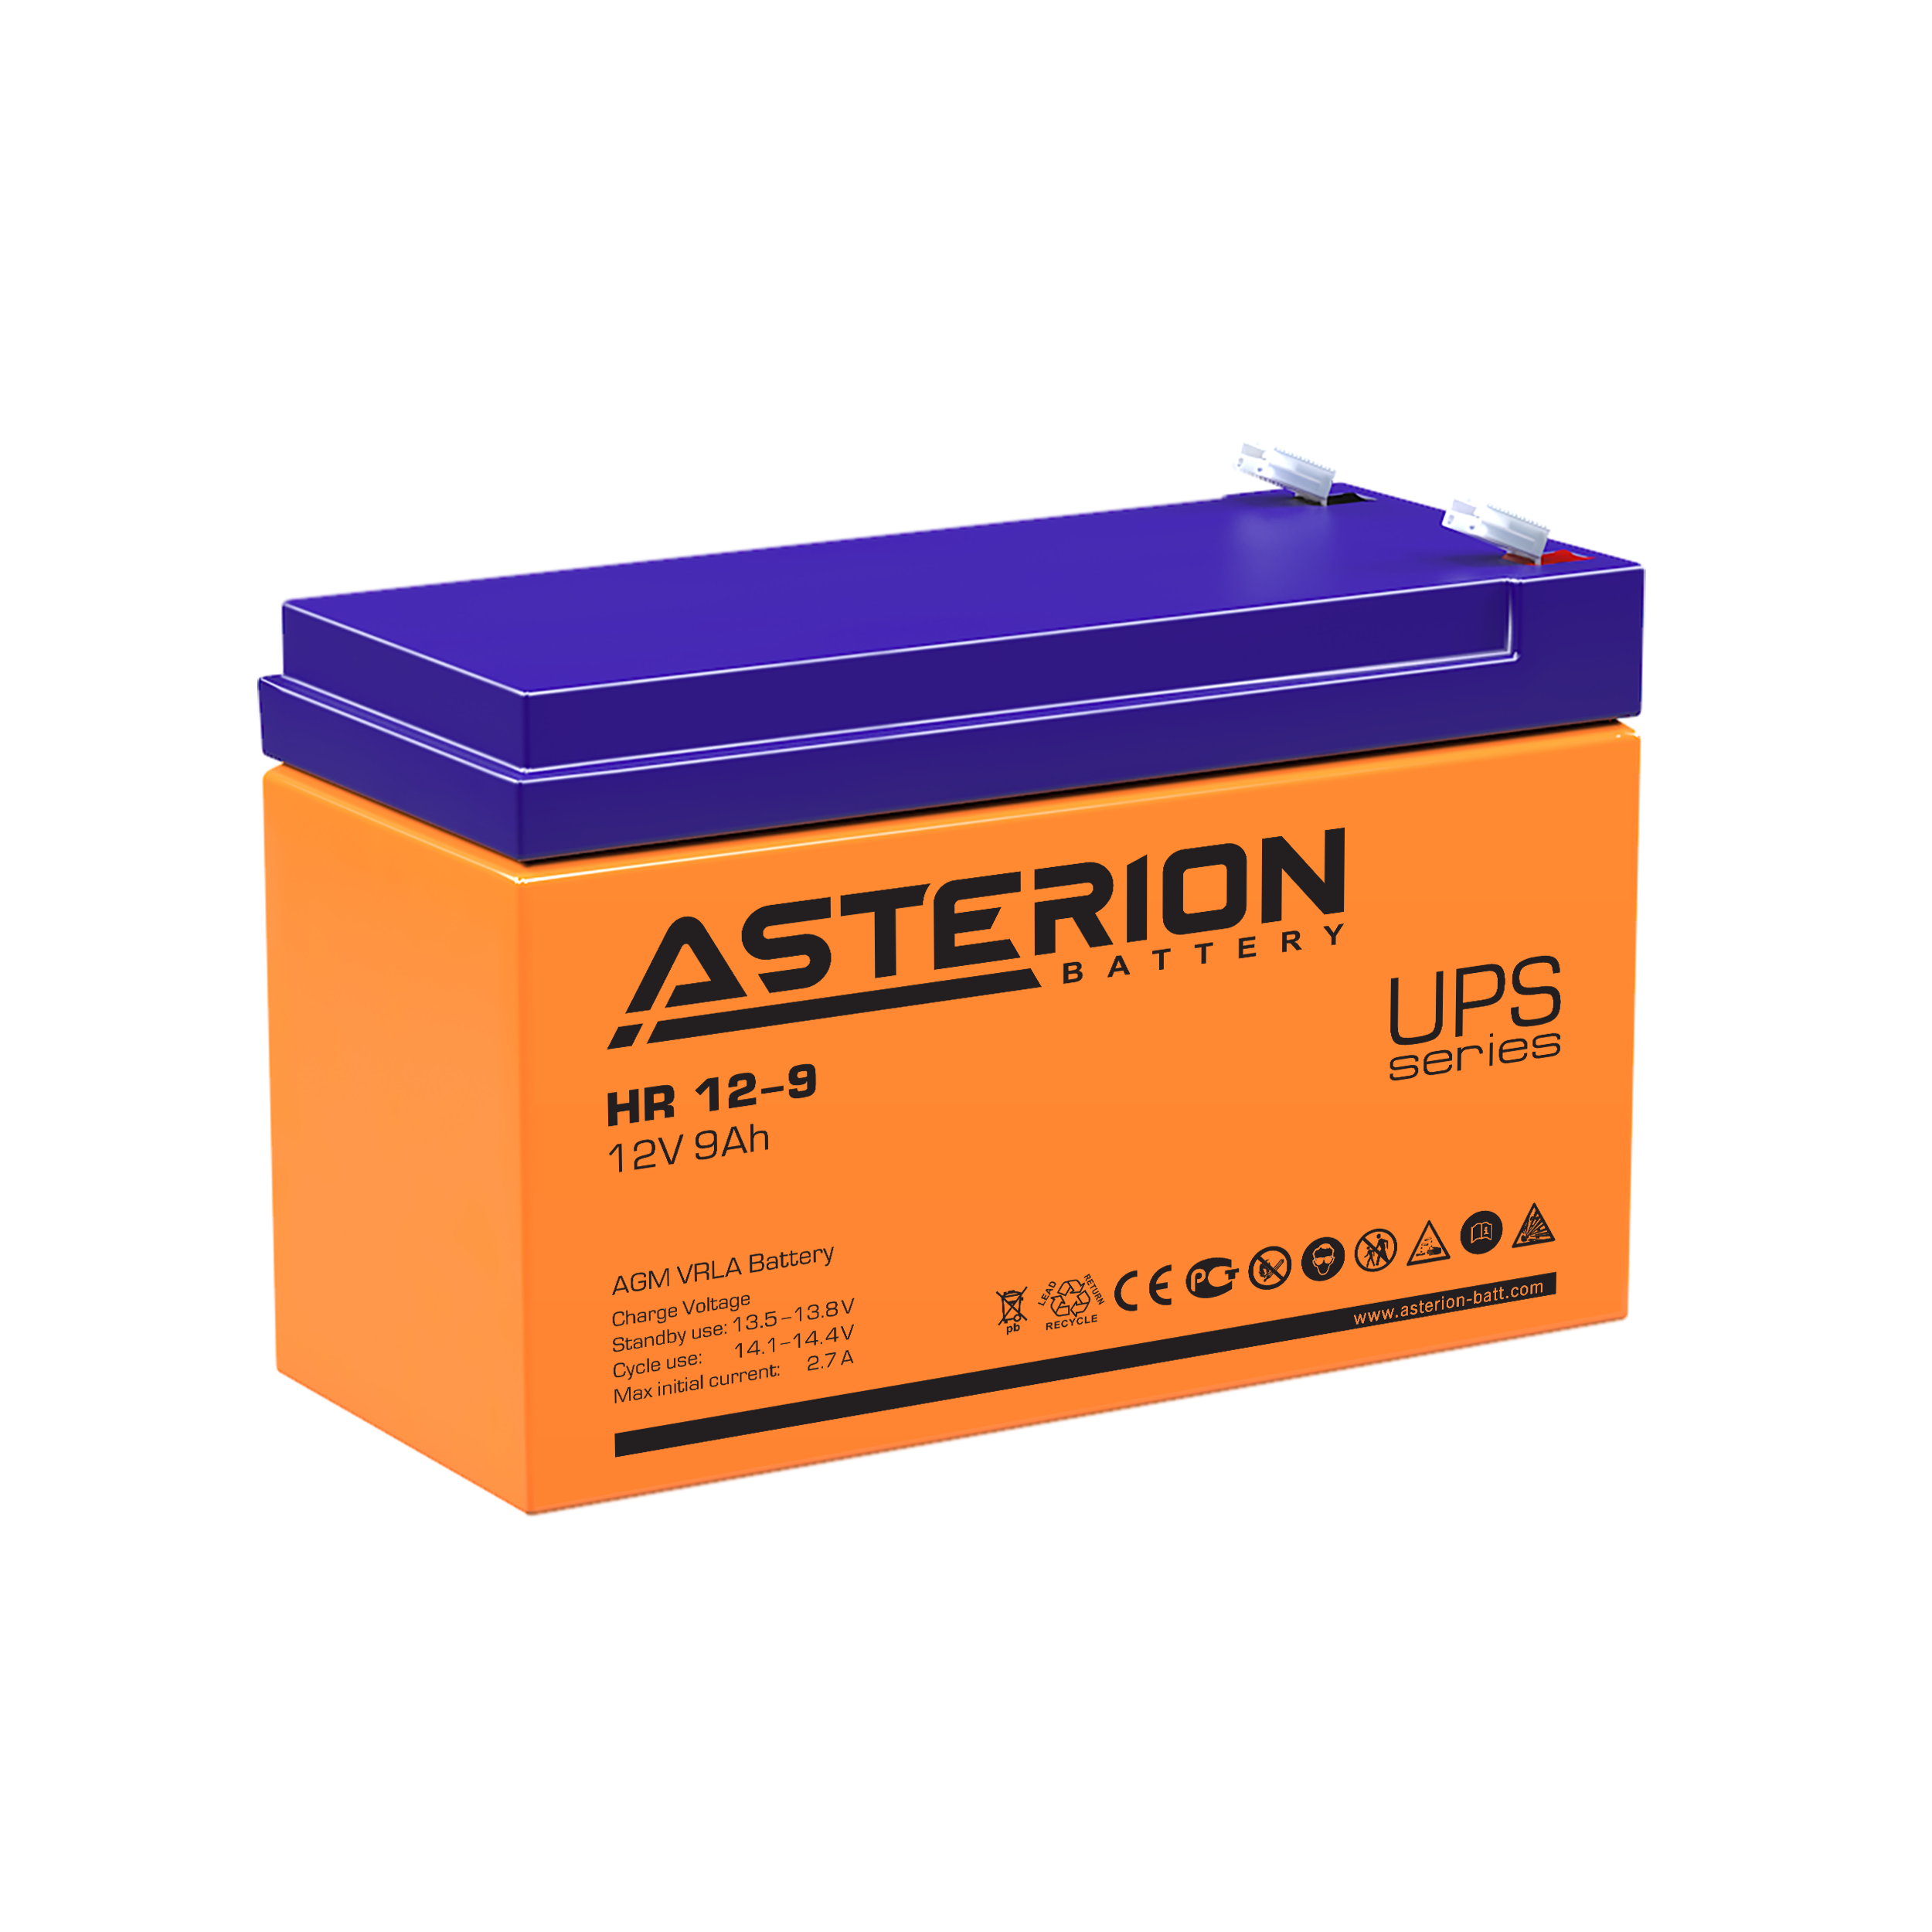 Asterion HR 12-9